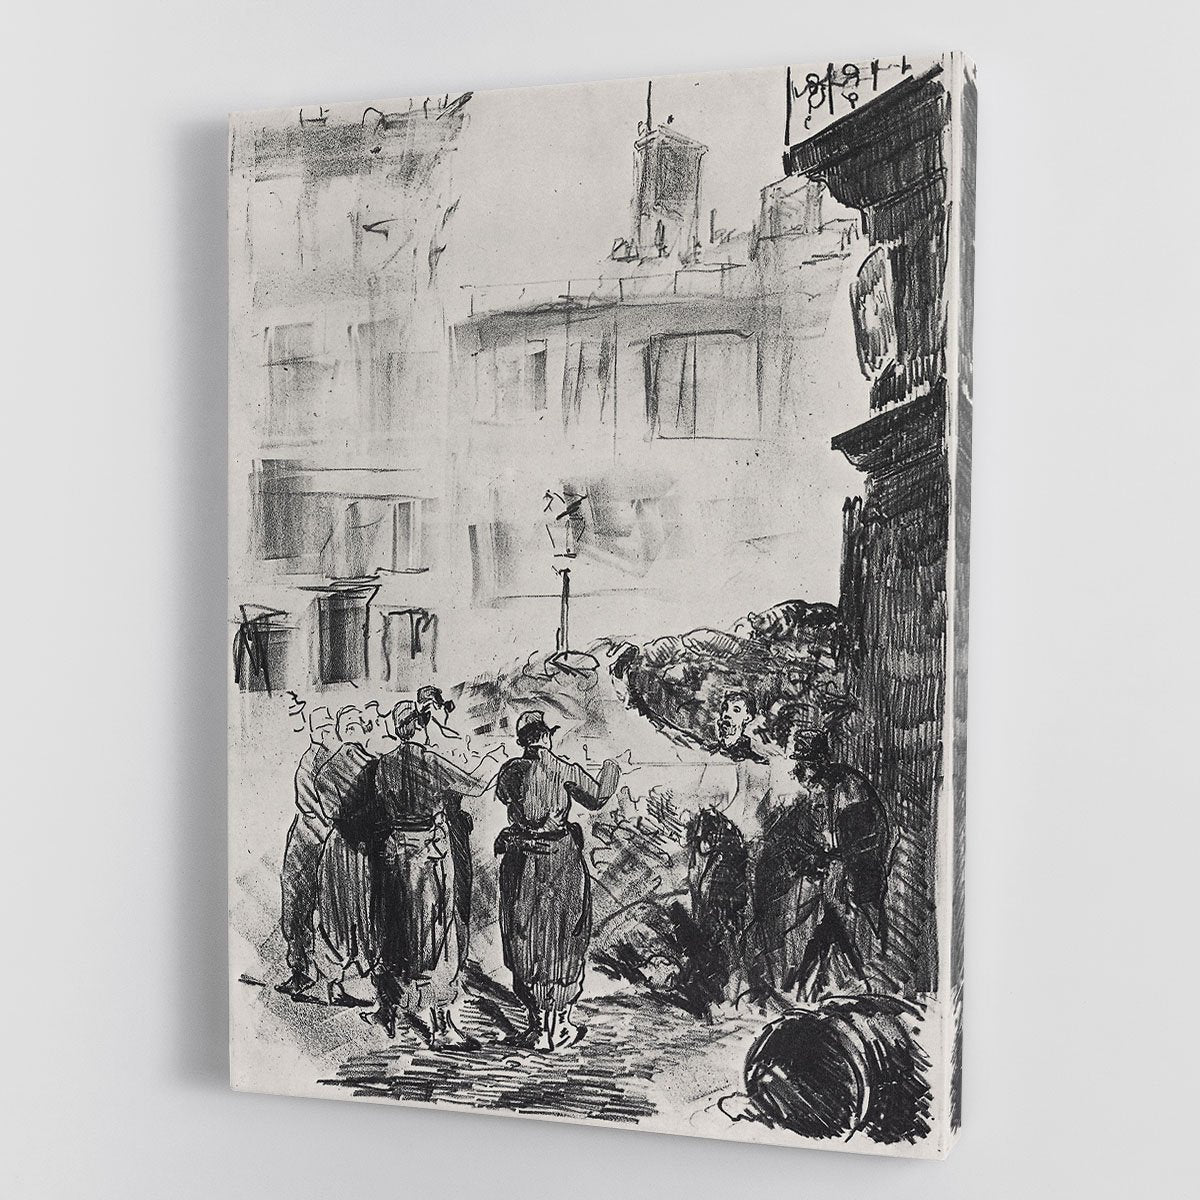 The Barricade by Manet Canvas Print or Poster